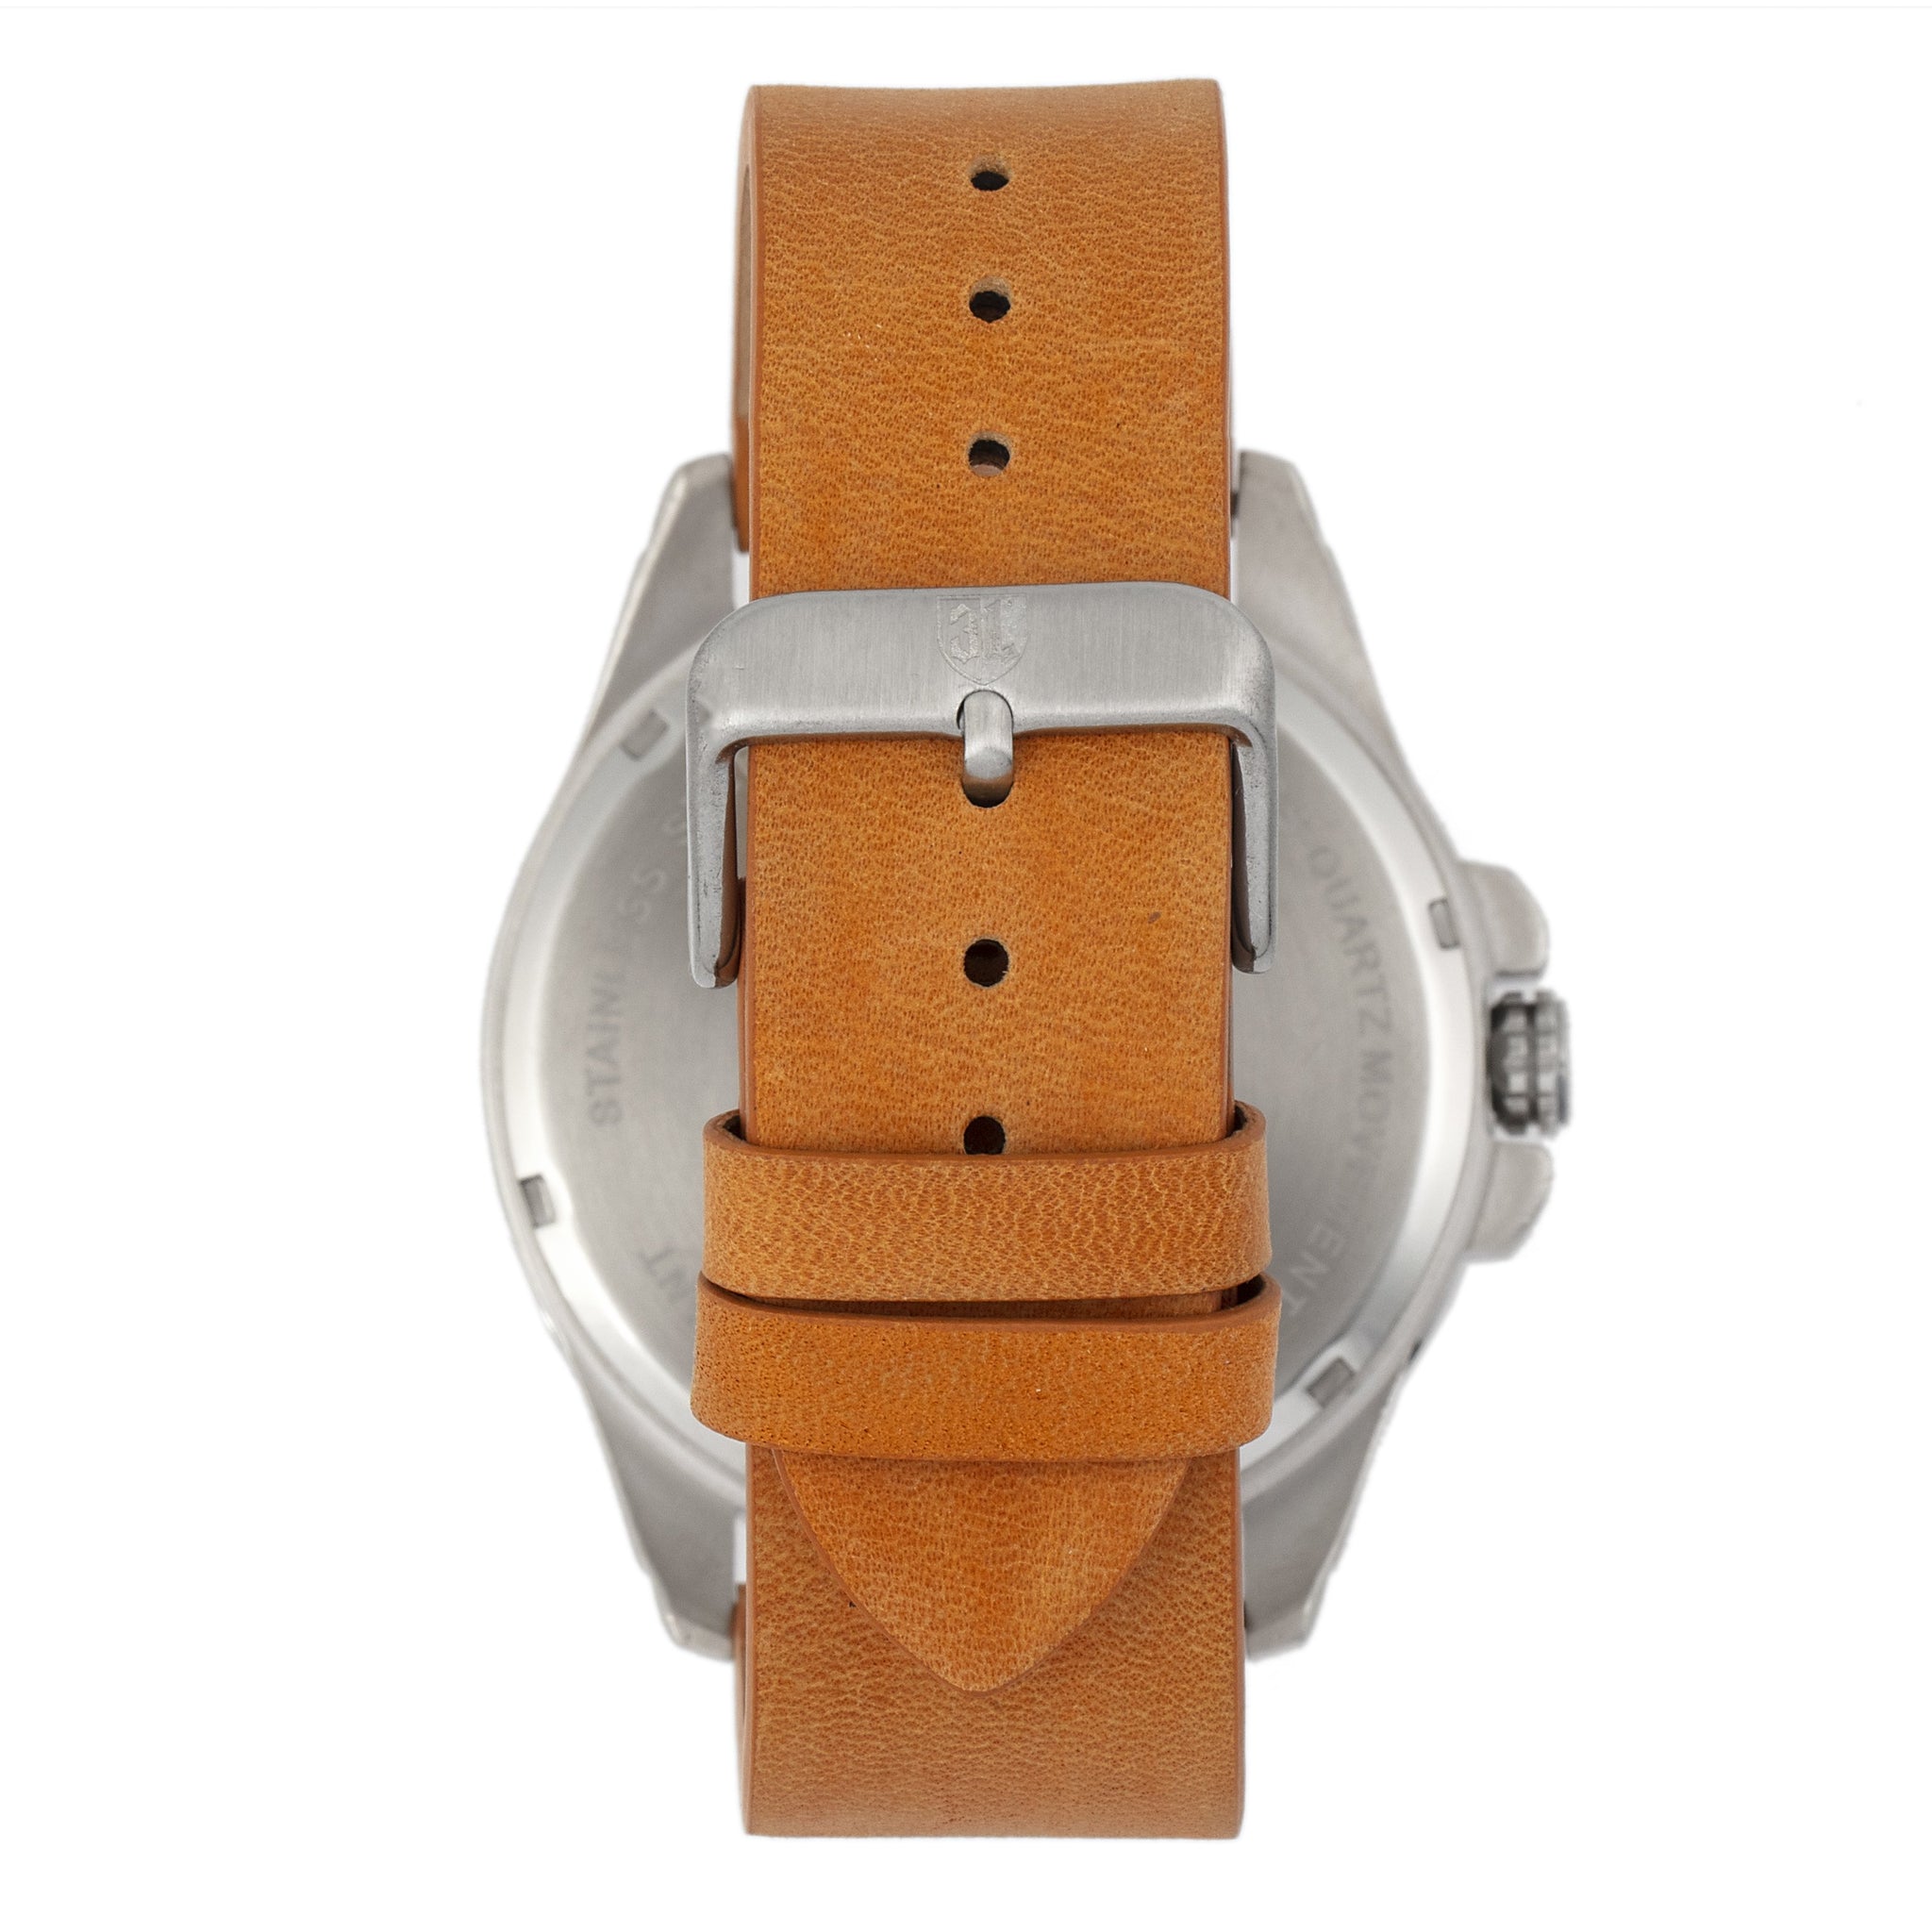 Three Leagues Artillery Leather-Band Watch with Date - Black/Camel/Blue - TLW3L103